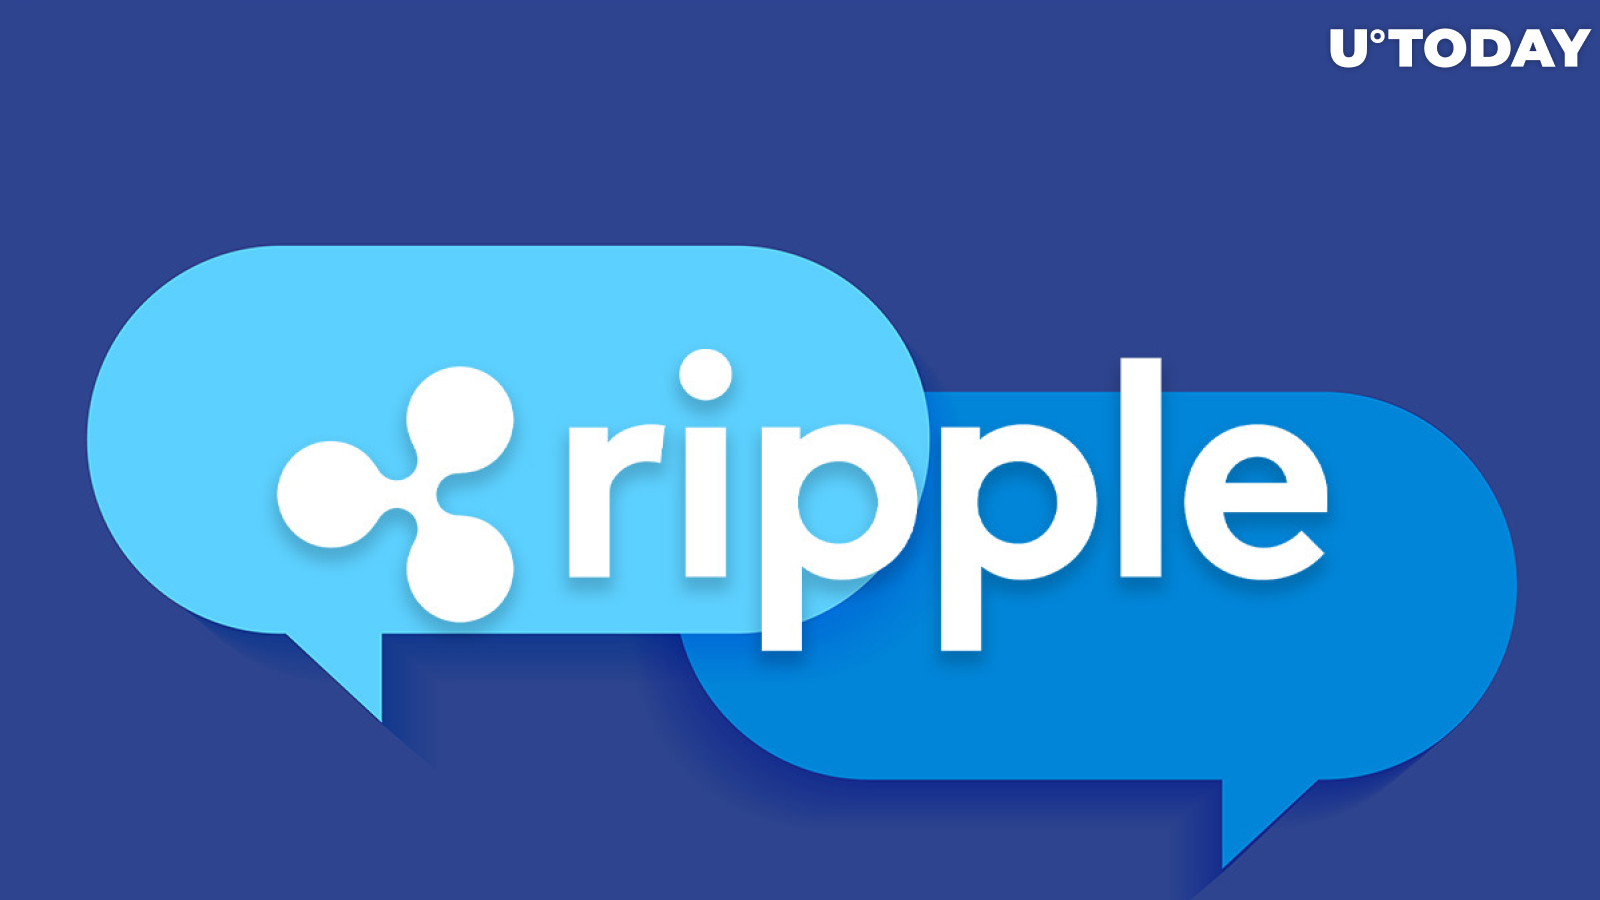 Ripple Has Been Talking to Central Banks "for a Long Time," Says RippleNet GM